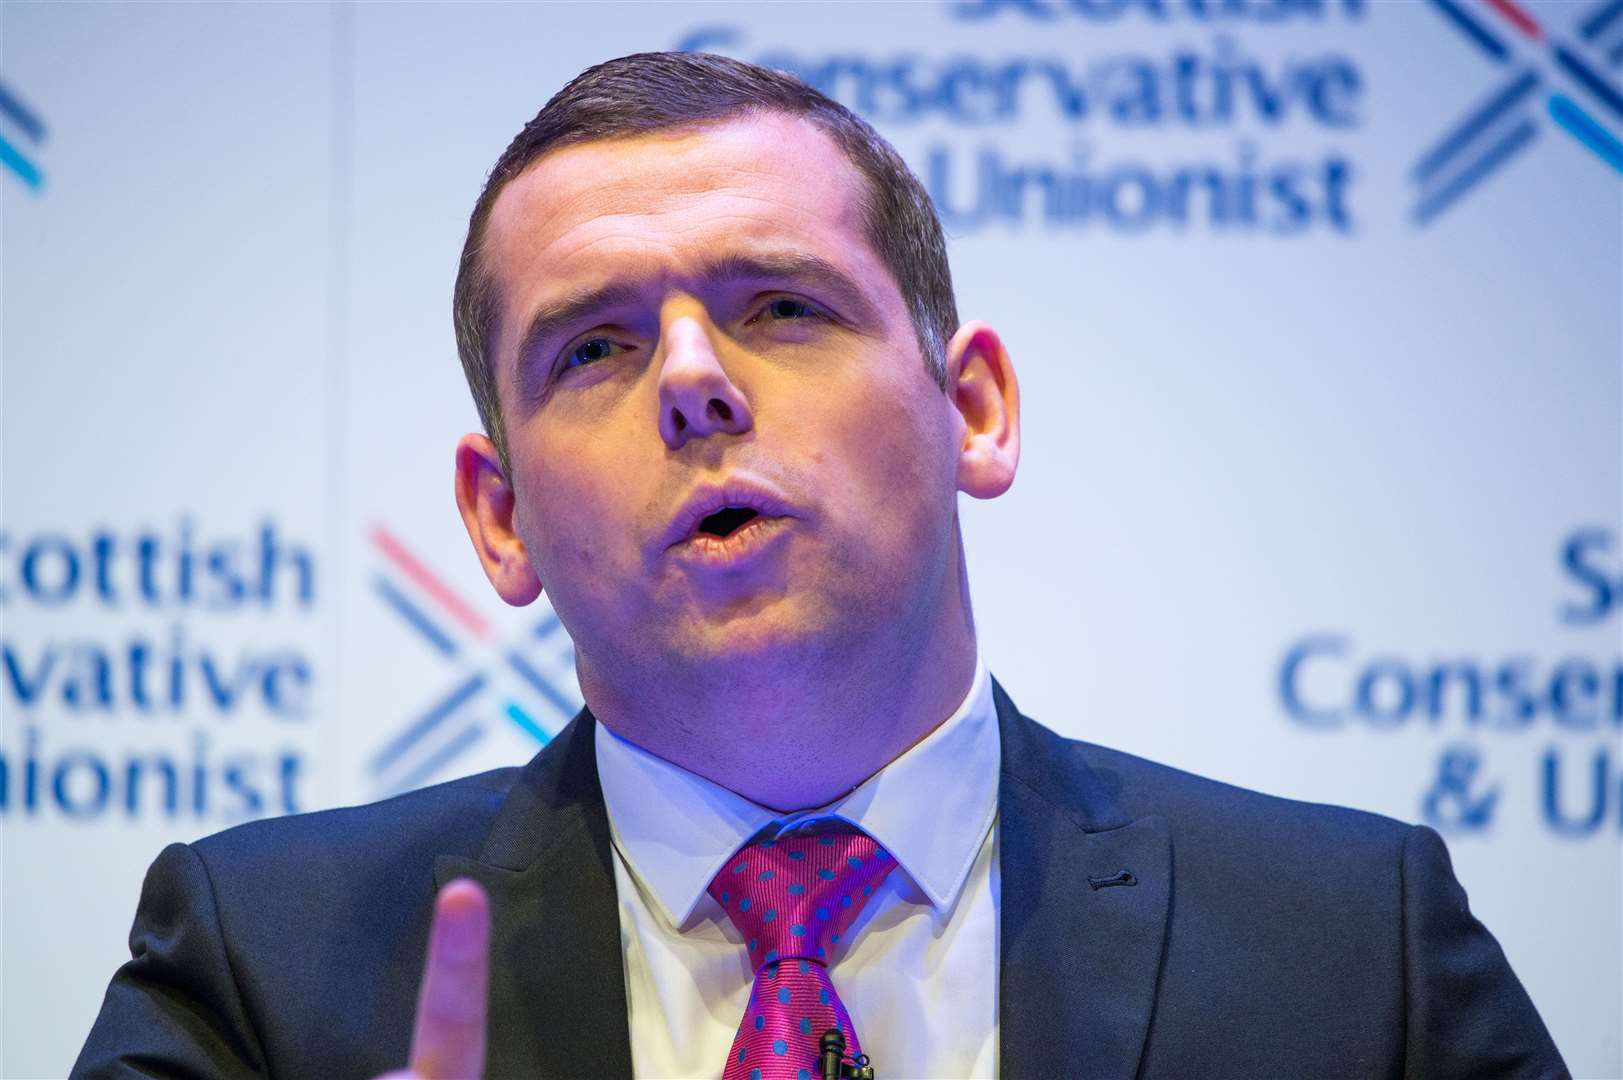 Douglas Ross said the Scottish Conservative voice will be heard on the new pro-union UK Cabinet committee (Colin D Fisher/Scottish Conservatives/PA)